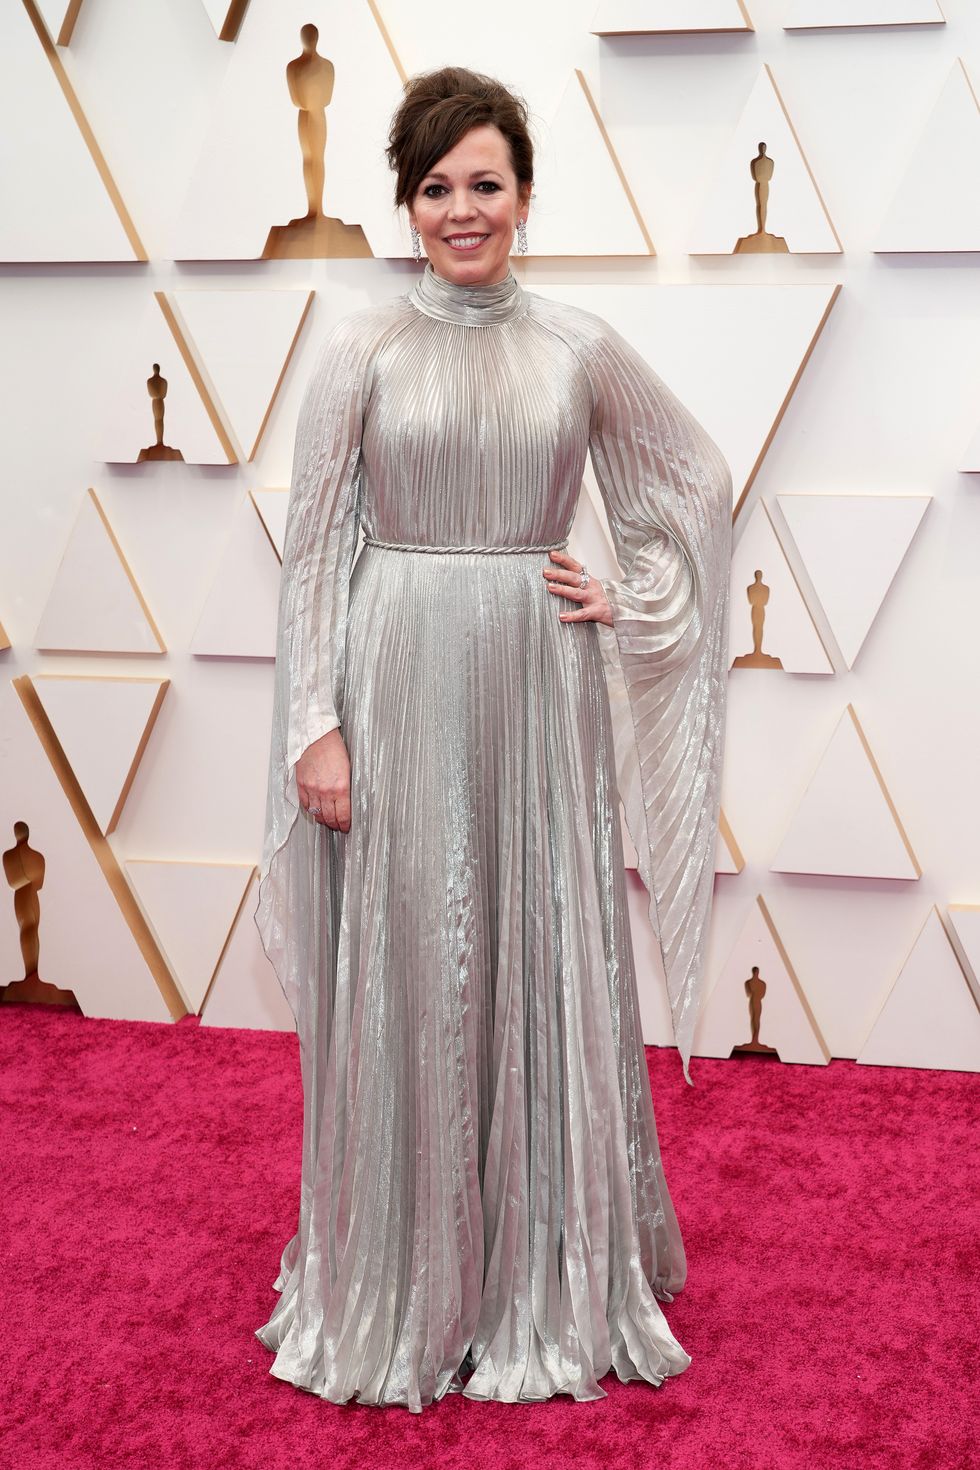 Oscars 2023 red carpet photos: See all the arrivals here